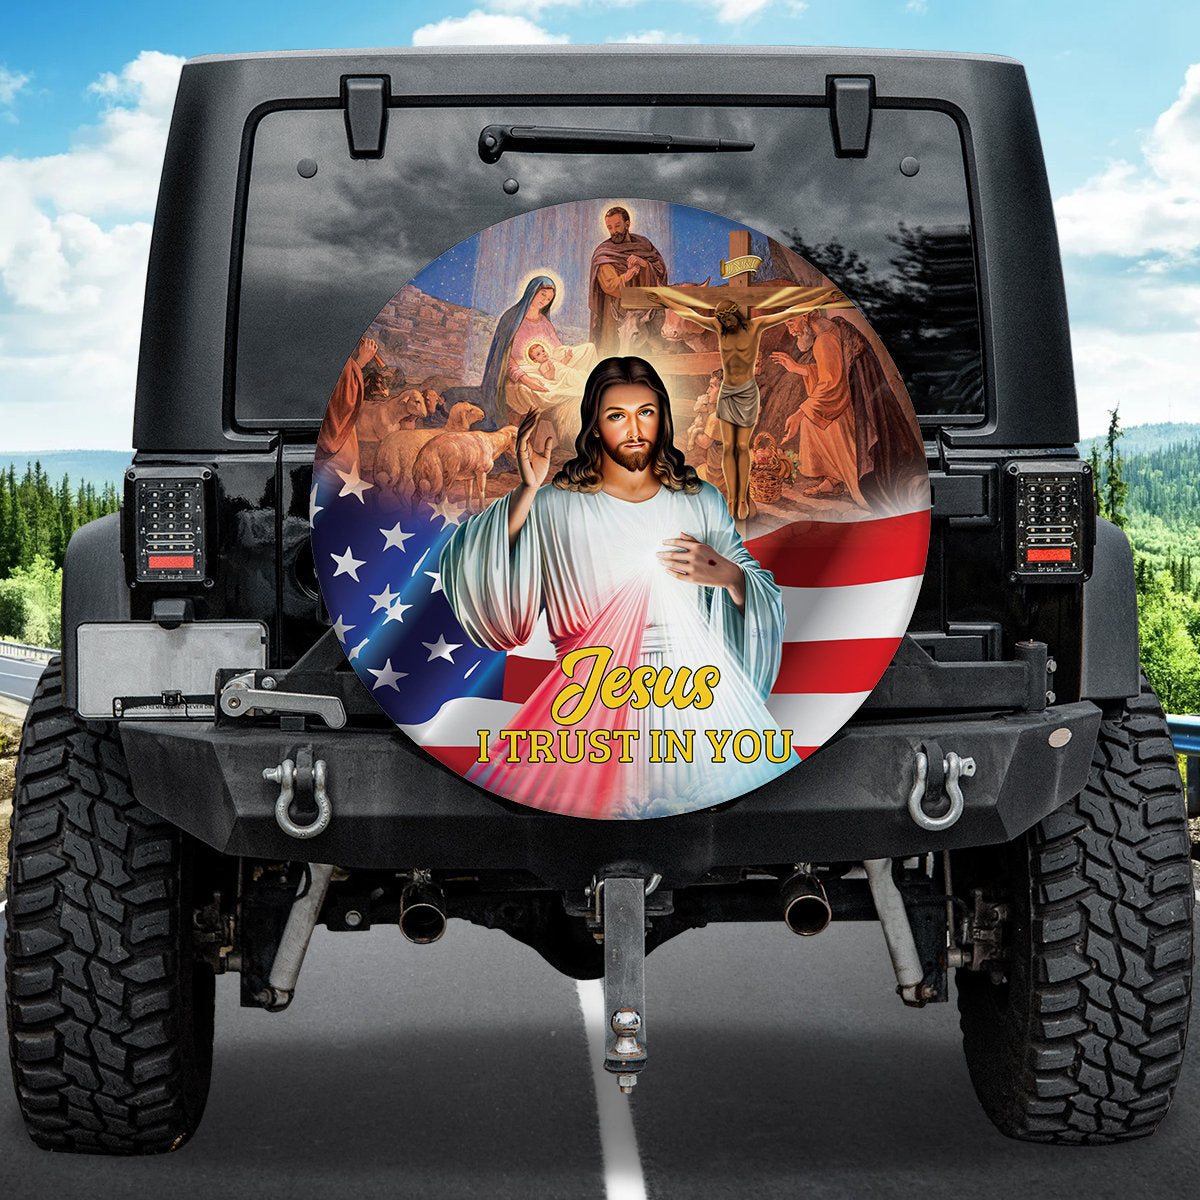 Jesus Spare Tire Cover - I Trust In You Tire Cover - Christian Tire Cover